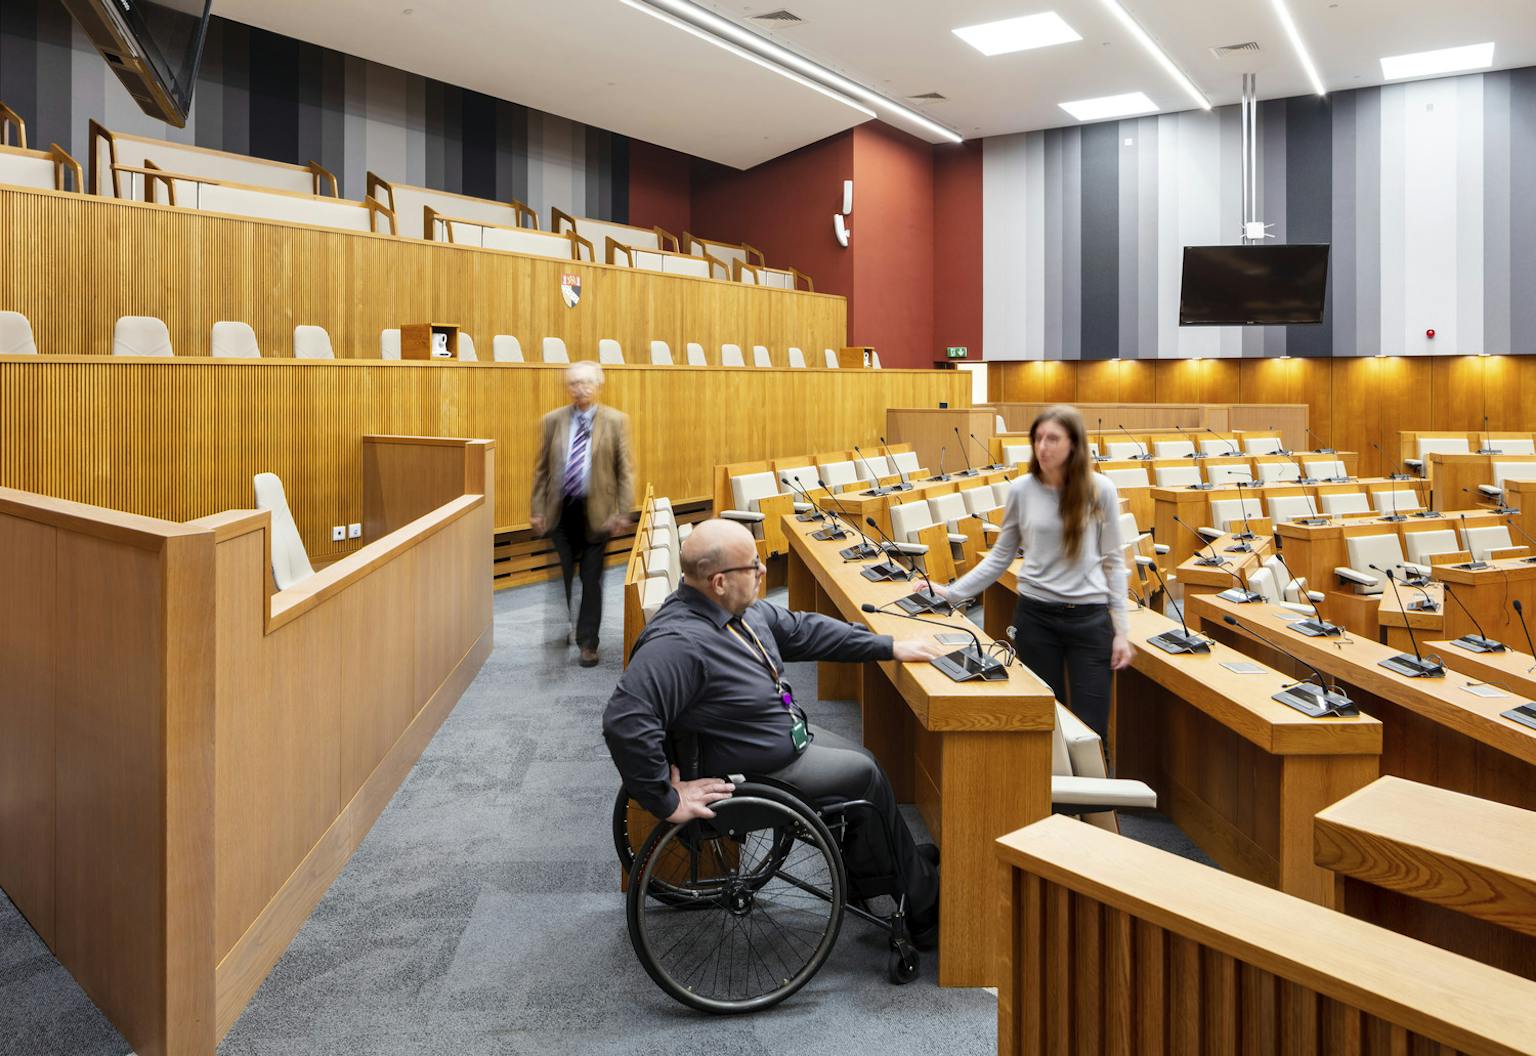 The newly accessible Norfolk County Hall